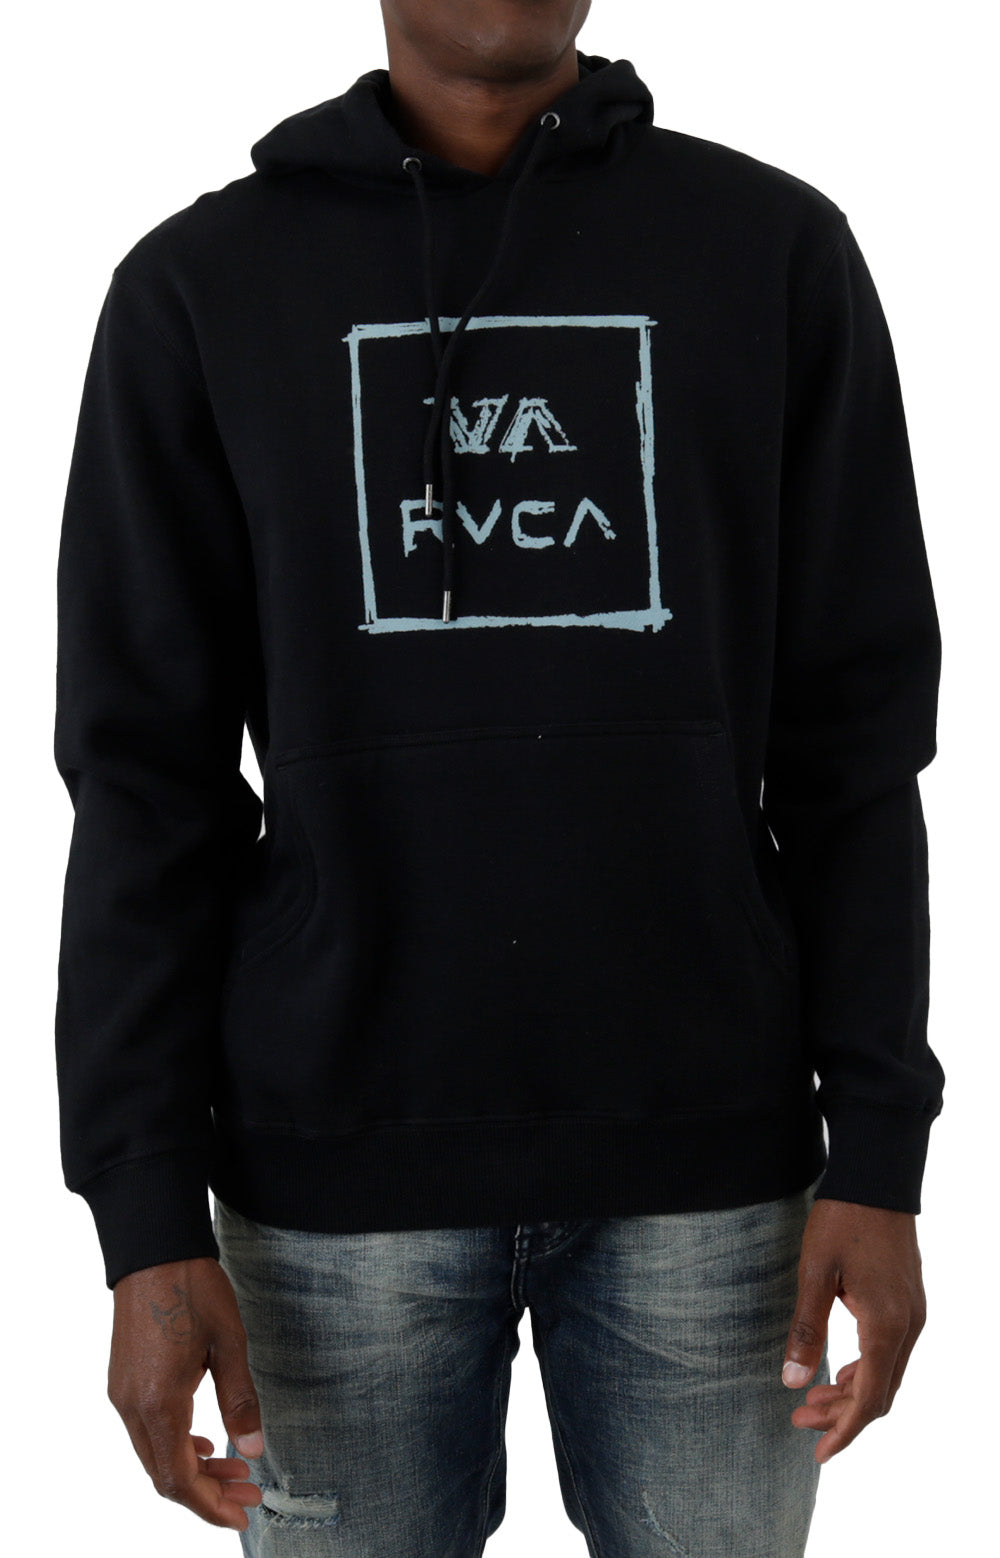 Sketch All The Way Pullover Hoodie - Black